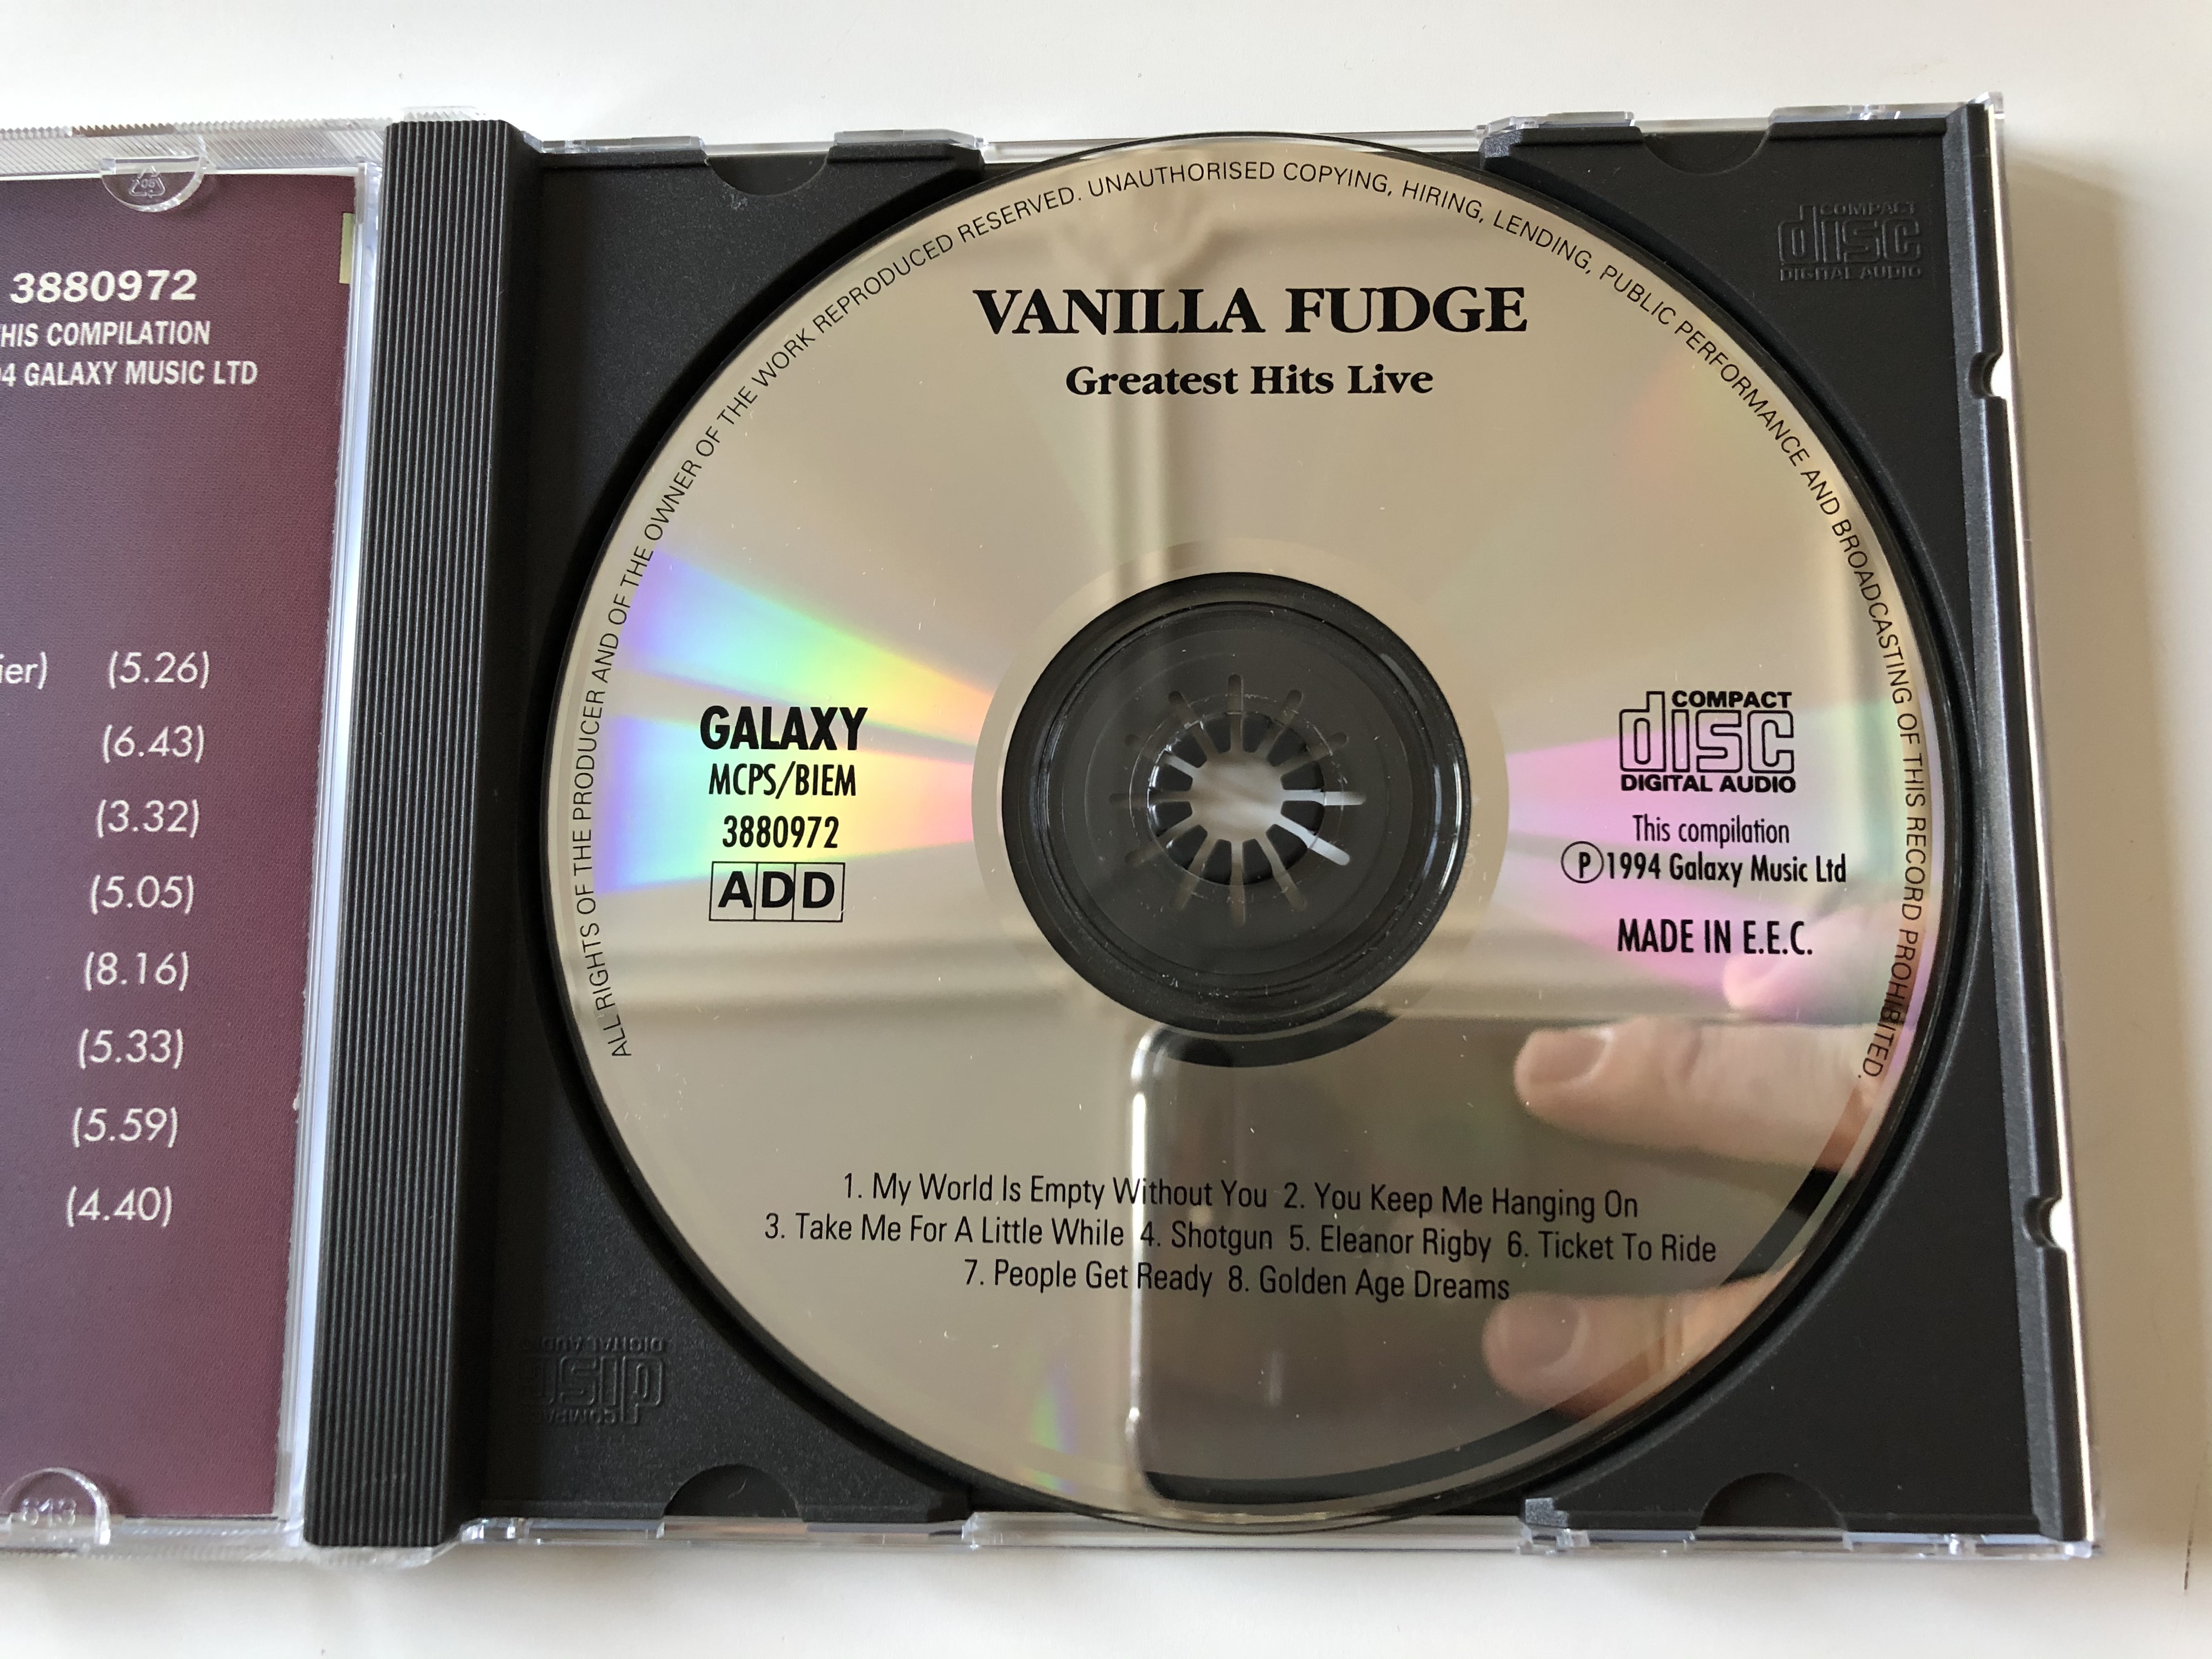 the-starlight-collection-vanilla-fudge-greatest-hits-live-shotgun-people-get-ready-my-world-is-empty-without-you-take-me-for-a-little-while-you-keep-me-hangin-on-galaxy-music-ltd.-3-.jpg